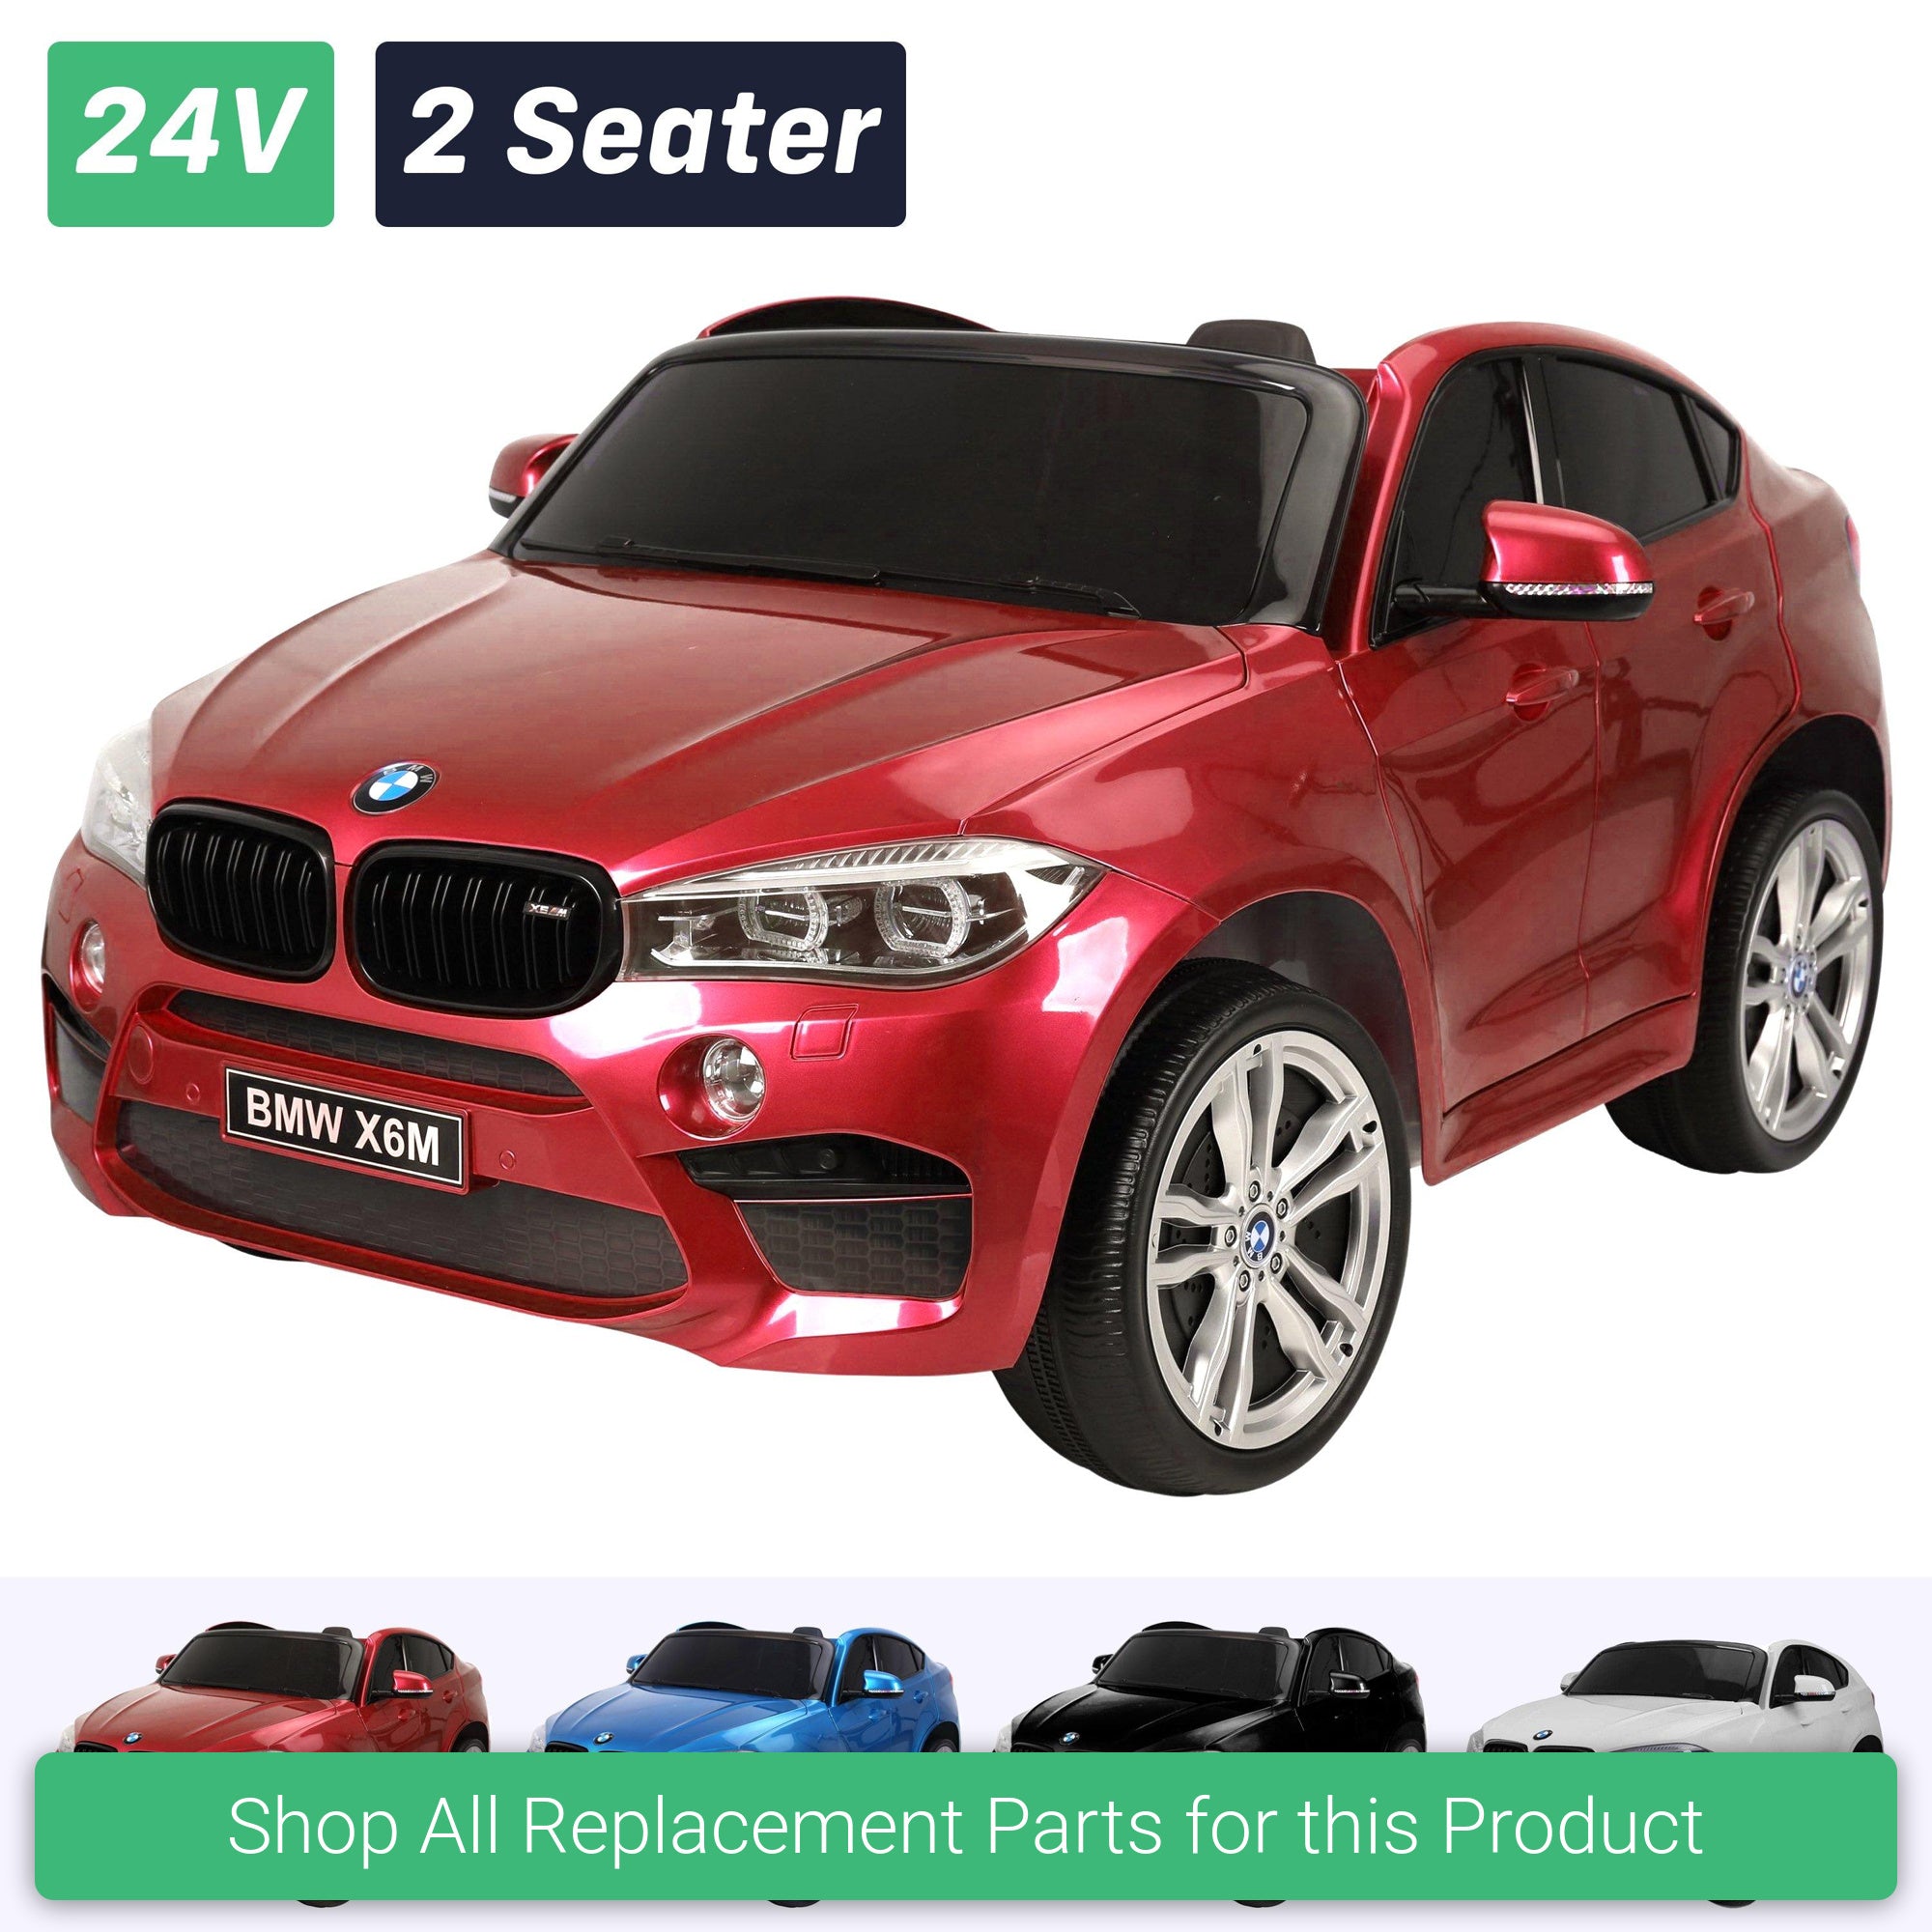 Replacement Parts and Spares for Kids BMW X6M - 2 Seater 24V - X6-24-VARI - JJ2168 - 24v